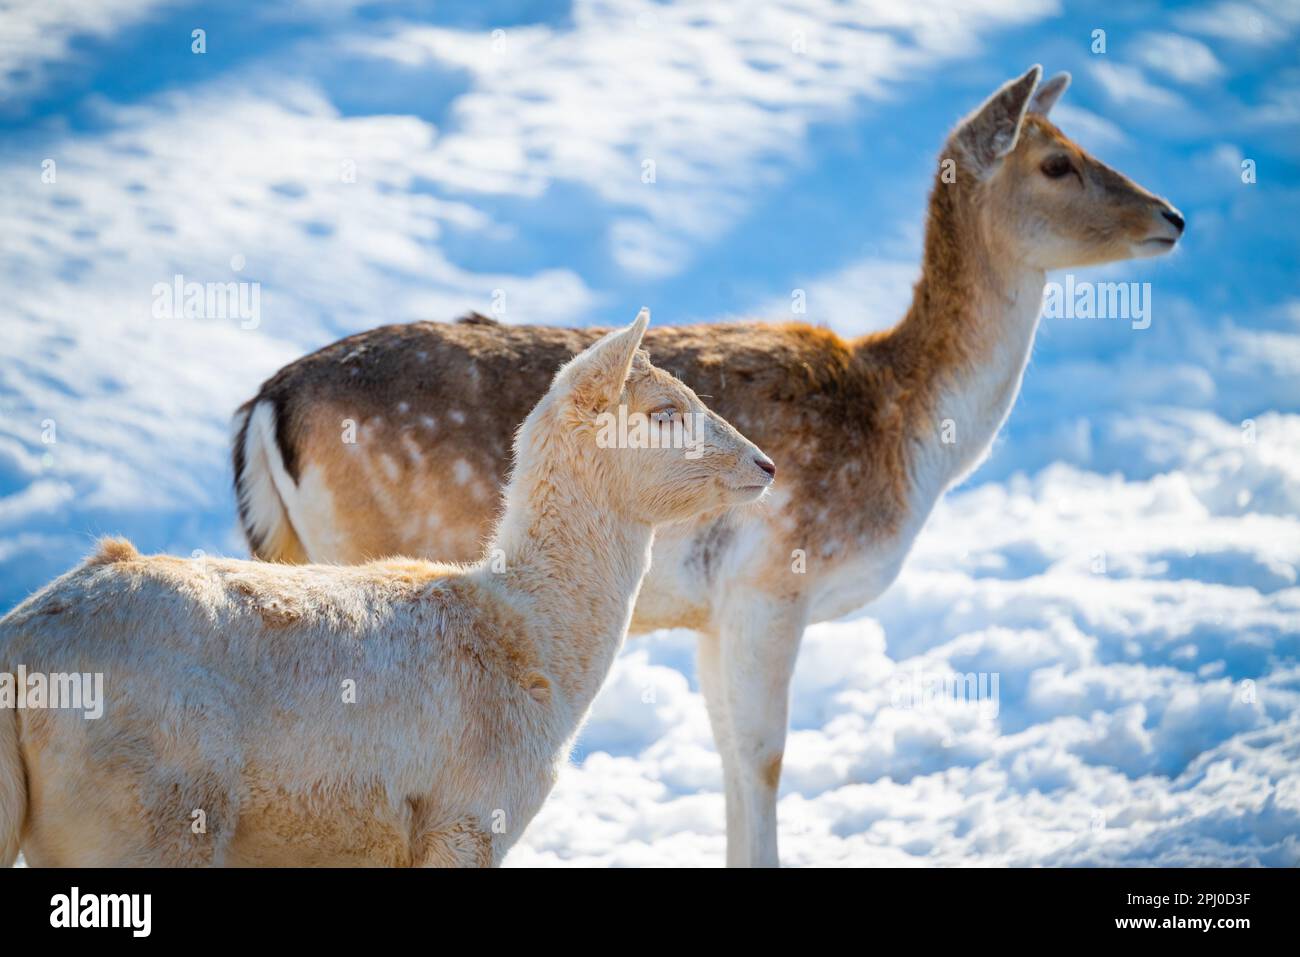 A mature deer stands in a wintery landscape, with a juvenile fawn standing nearby Stock Photo